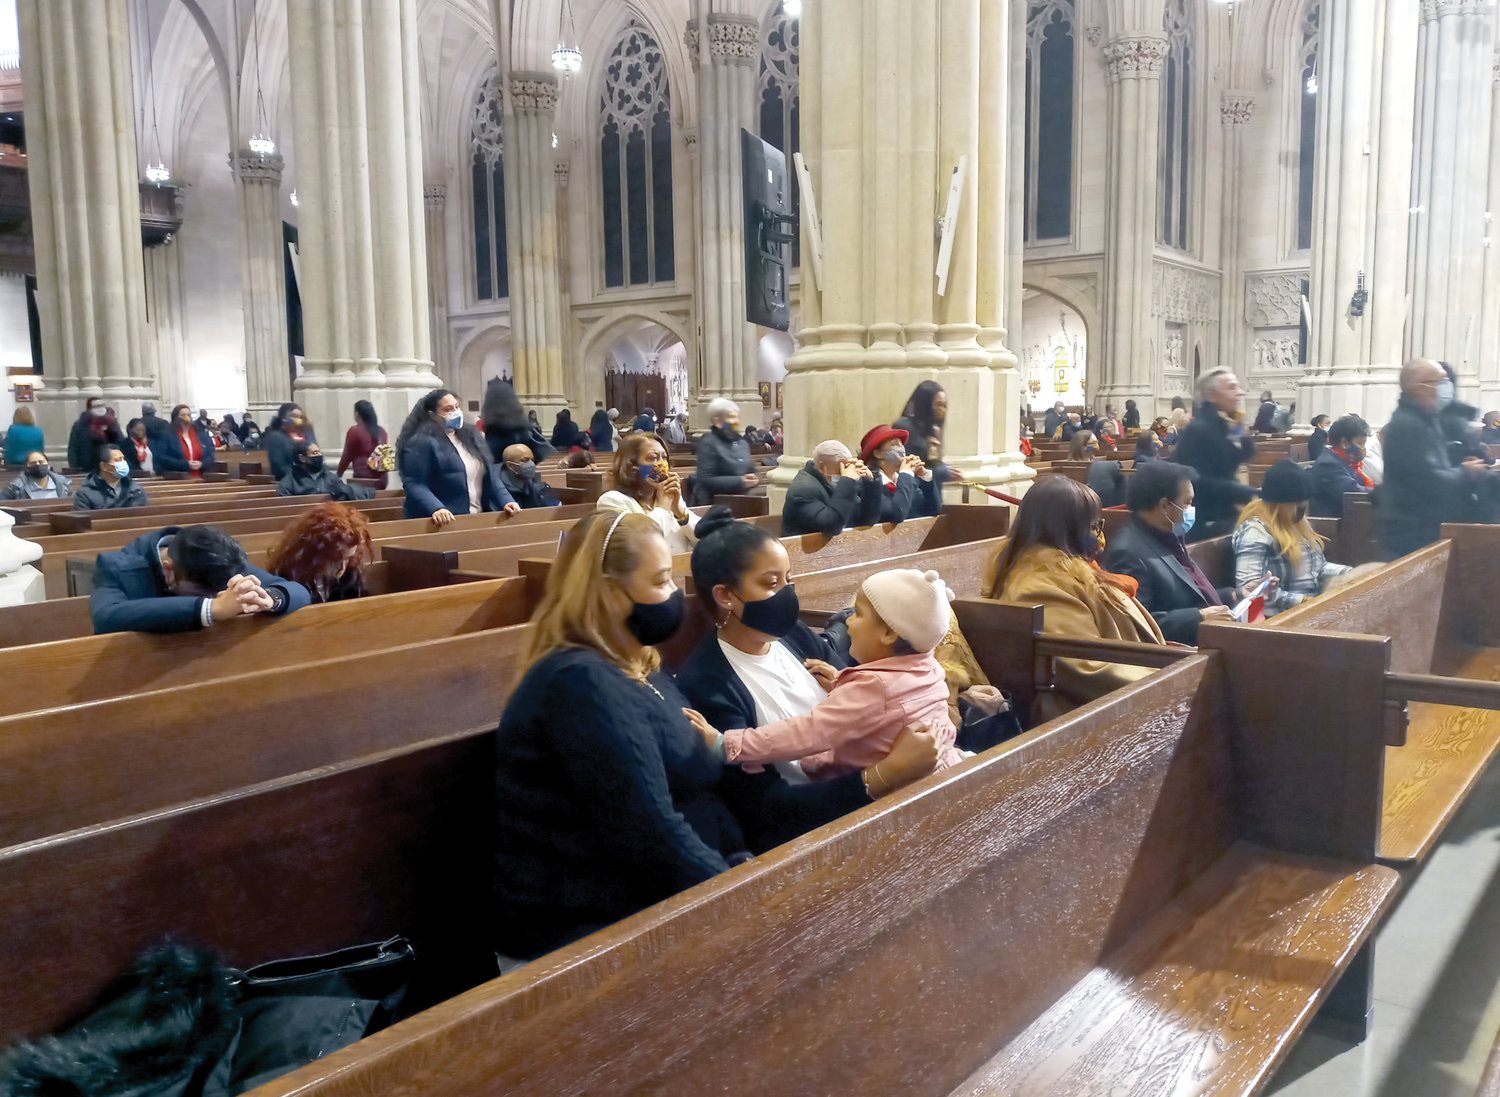 THREE GENERATIONS—Consuelo Rosa, foreground, and her daughter Yanely Polanco Rosa were present at the annual Our Lady of Altagracia Mass Jan. 17 at St. Patrick’s Cathedral. On Ms. Polanco Rosa’s lap is her daughter Emma, 3. The family members were part of an estimated congregation of 300. The principal celebrant and homilist was retired Auxiliary Bishop Octavio Cisneros of the Diocese of Brooklyn. Our Lady of Altagracia is the patroness of the Dominican Republic.